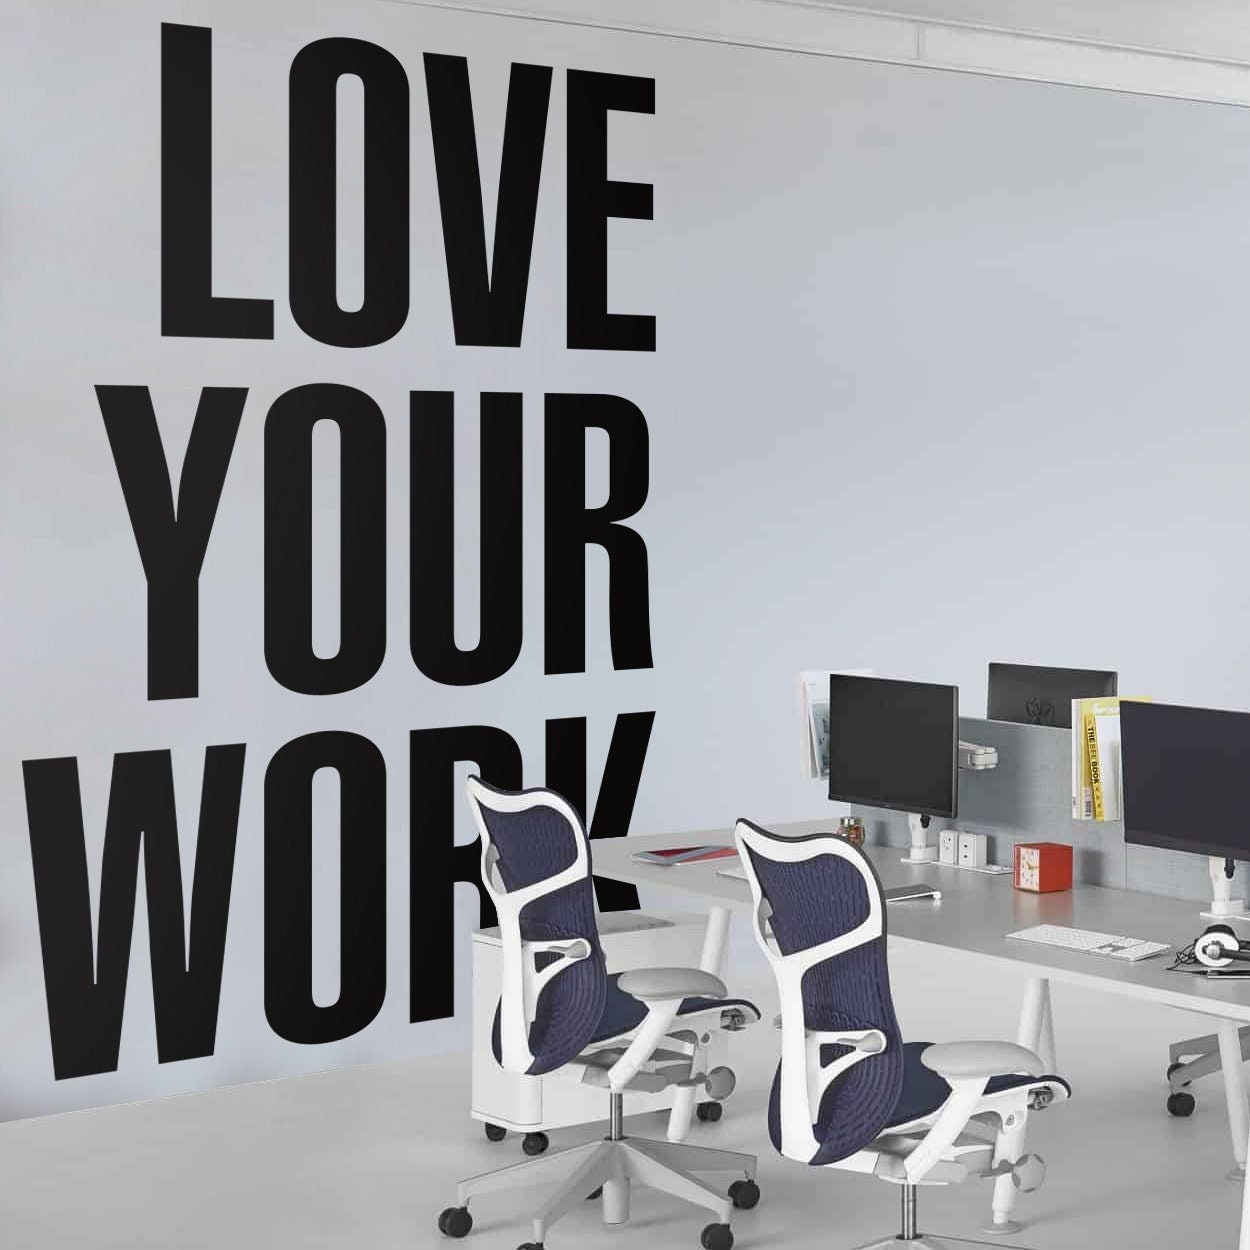 Love Where You Work: Cool Office Decor Ideas That Are Sure to Impress